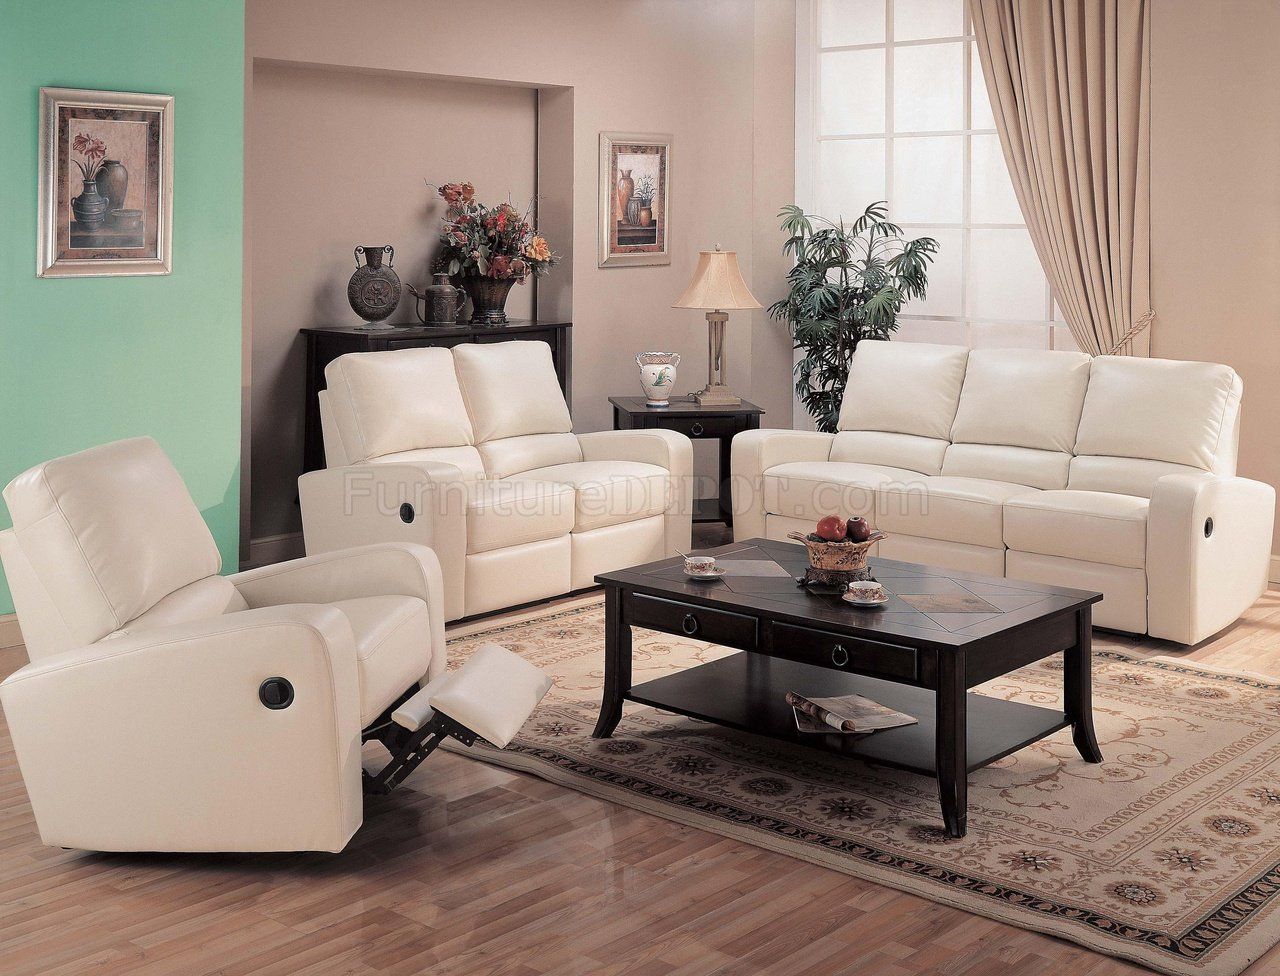 Cream Bonded Leather Modern Reclining Living Room Sofa W Throughout Living Room Sofa Chairs (View 6 of 15)